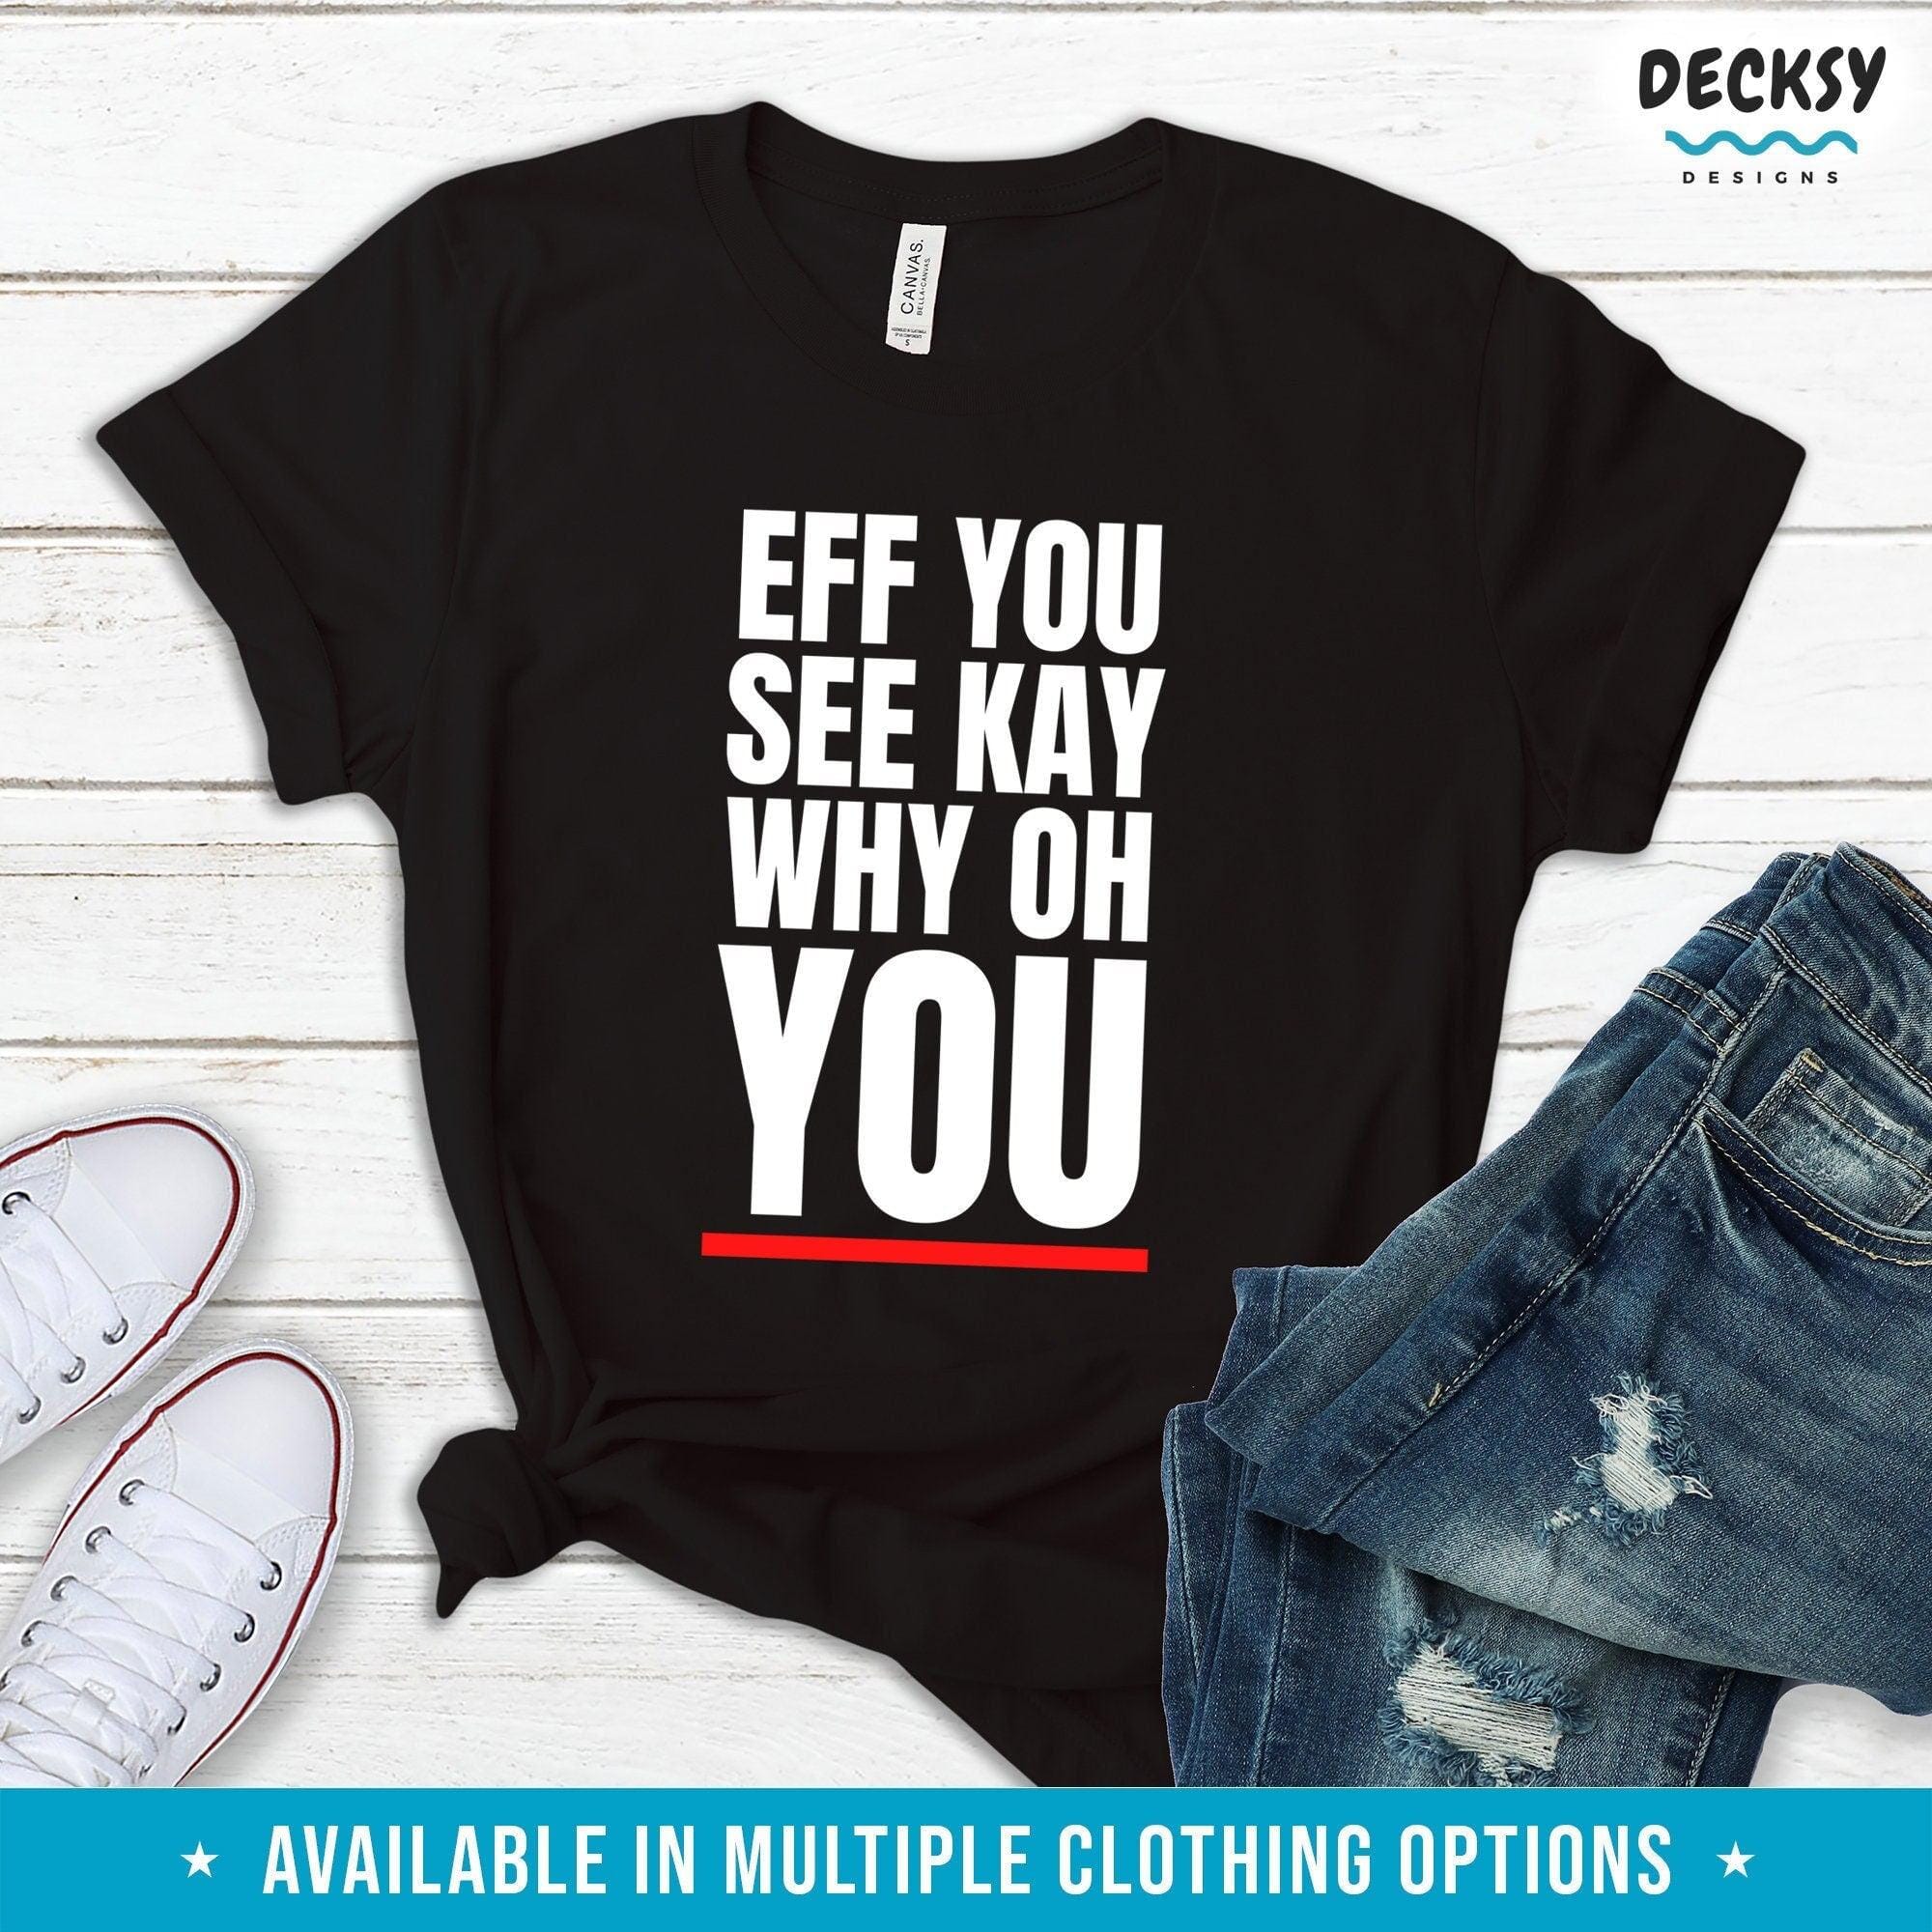 Eff You See Kay Why Oh You Shirt, Funny Yoga Gift-Clothing:Gender-Neutral Adult Clothing:Tops & Tees:T-shirts:Graphic Tees-DecksyDesigns